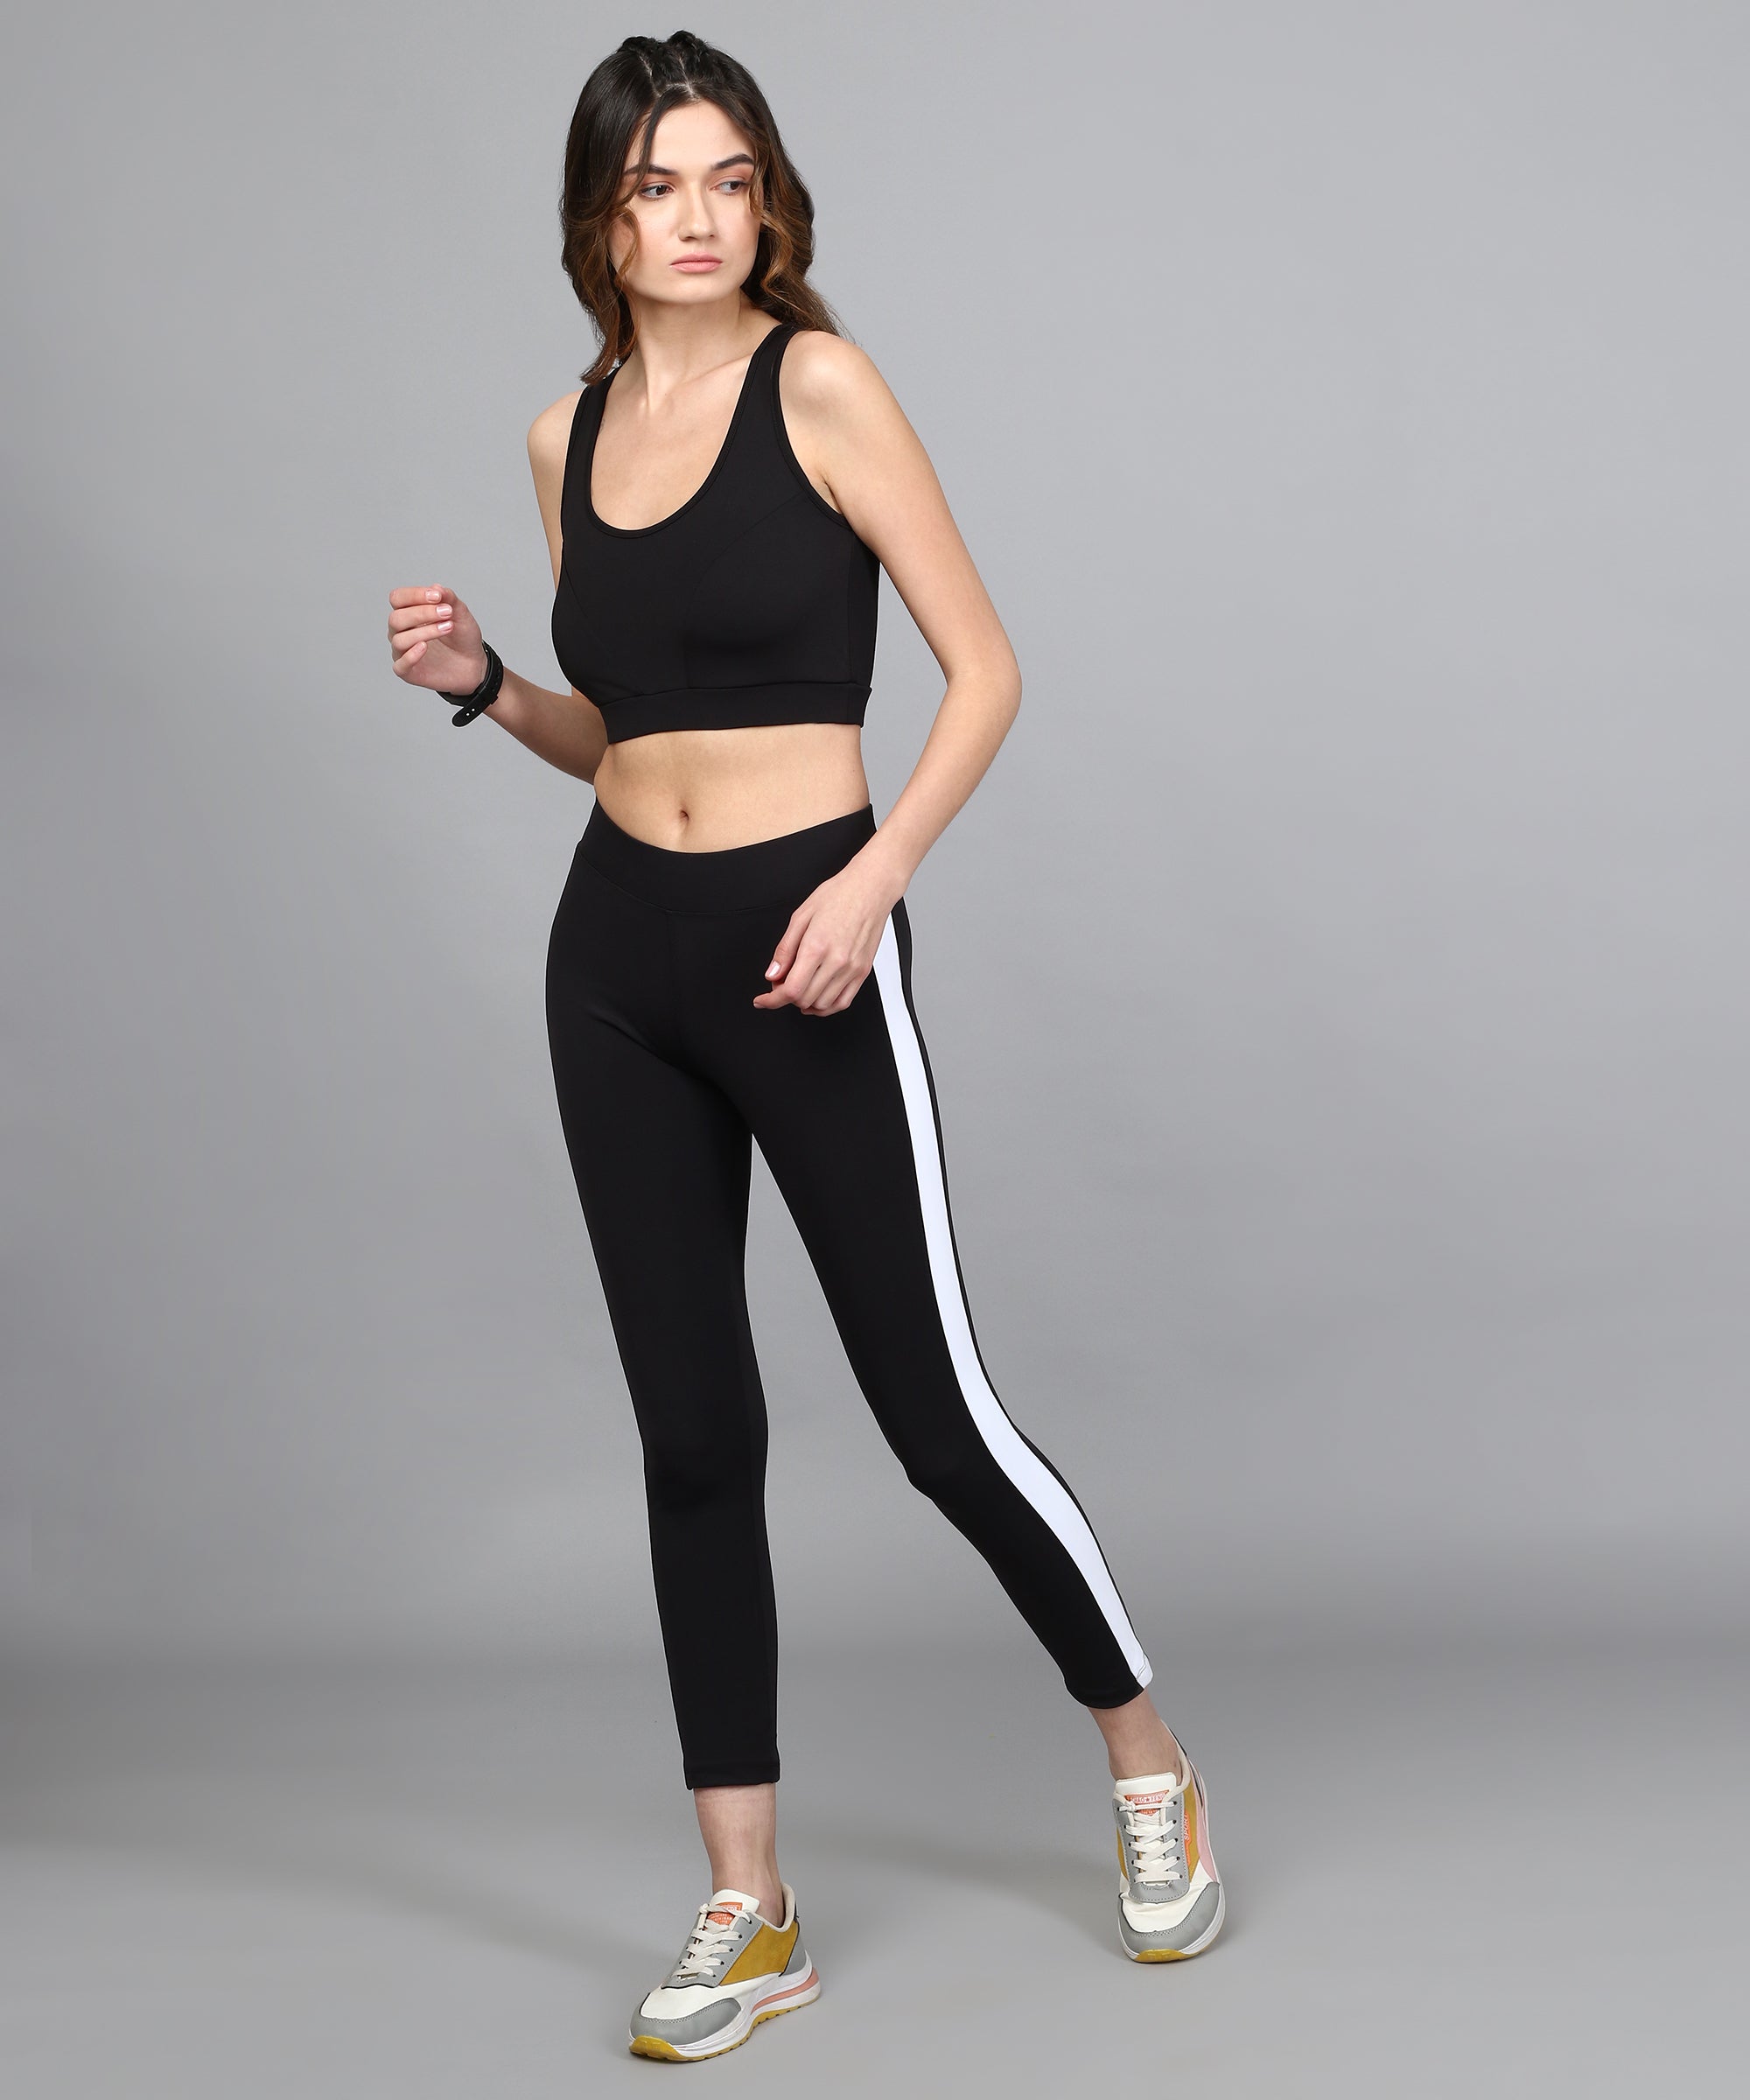 Buy Yoga Gym Dance Workout and Active Sports Fitness Side Striped Leggings  Tights for Women|Girls Online In India At Discounted Prices